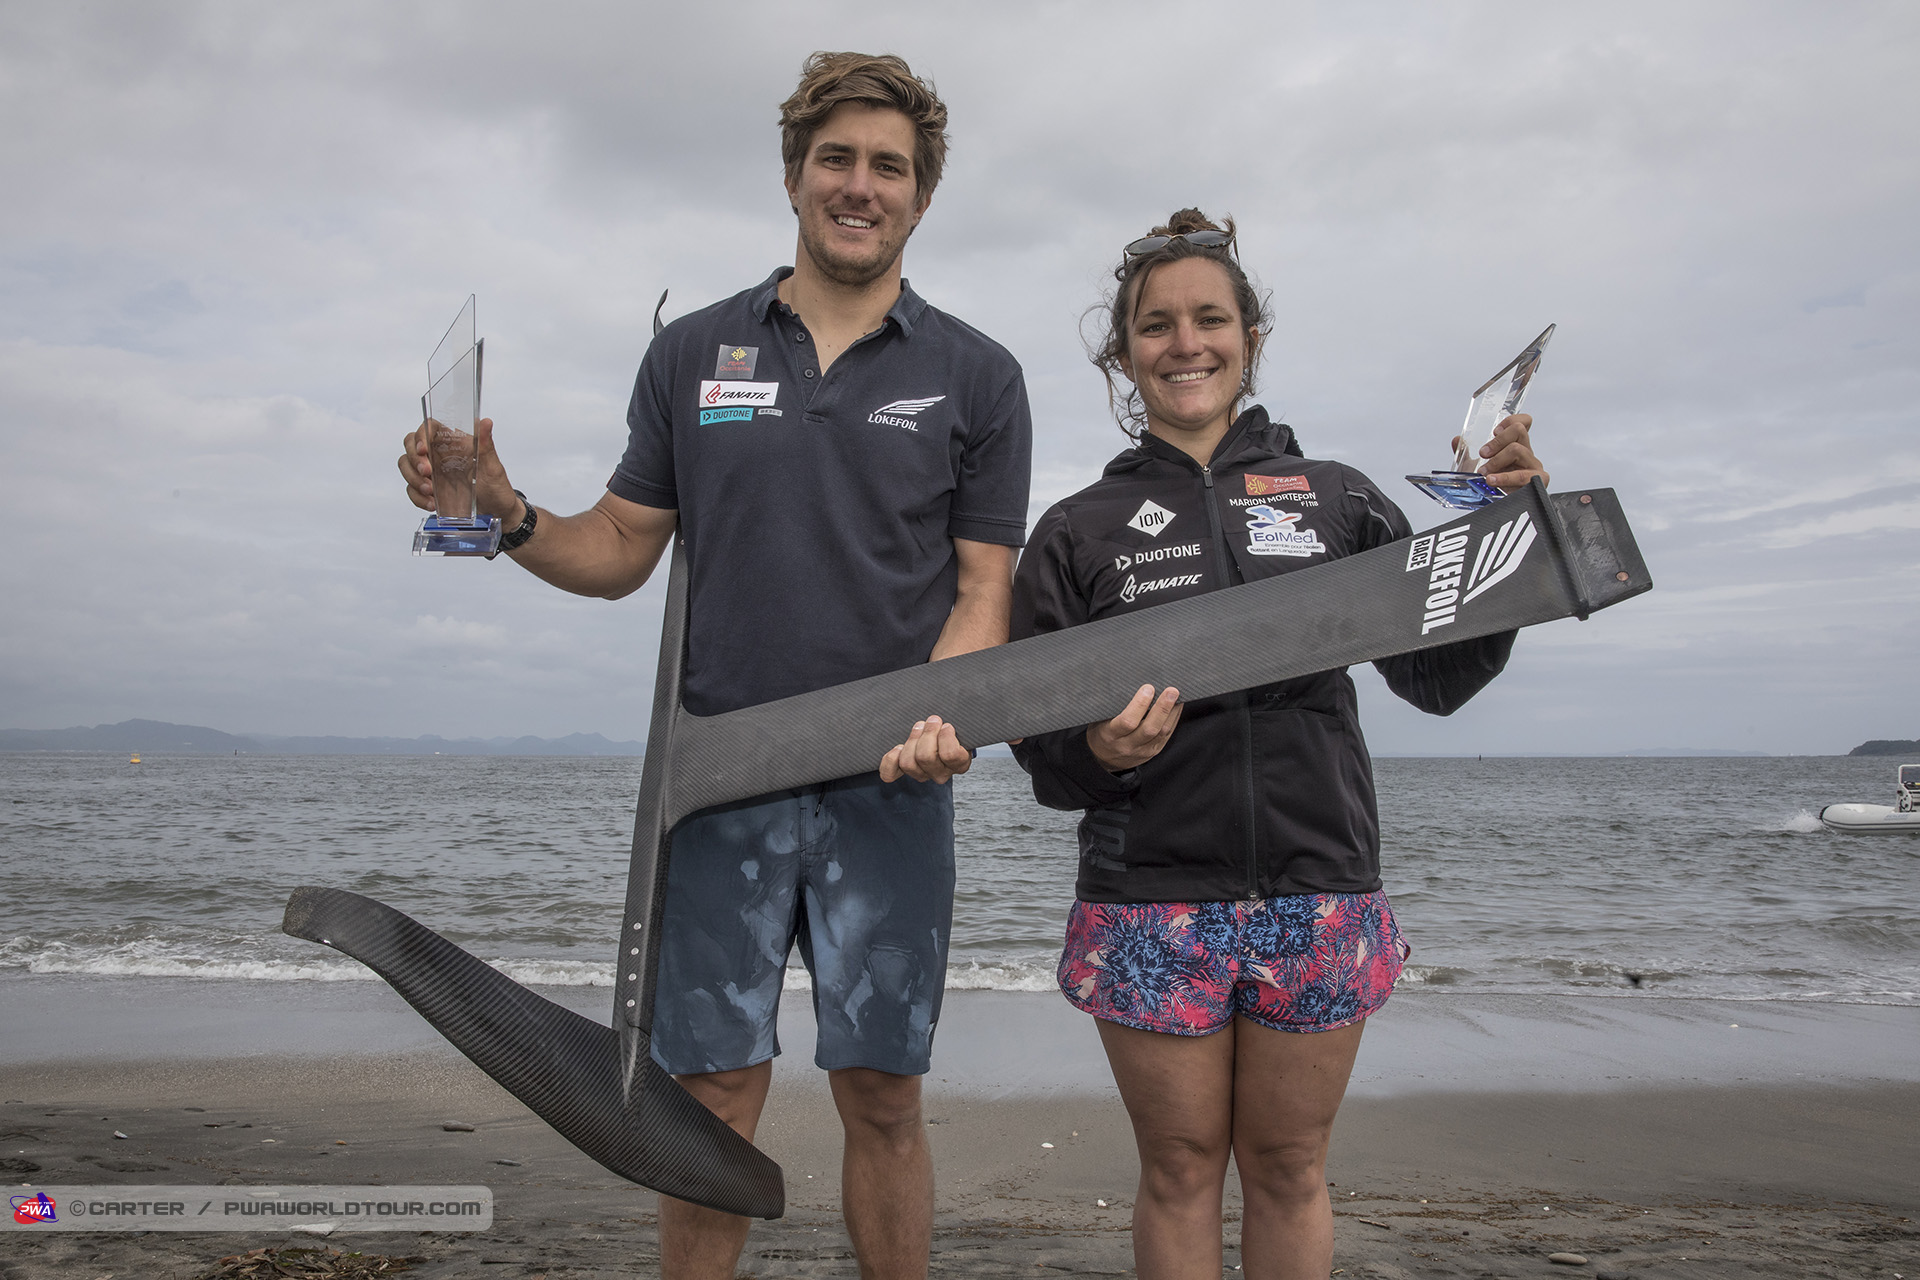 More success for Pierre and Marion Mortefon